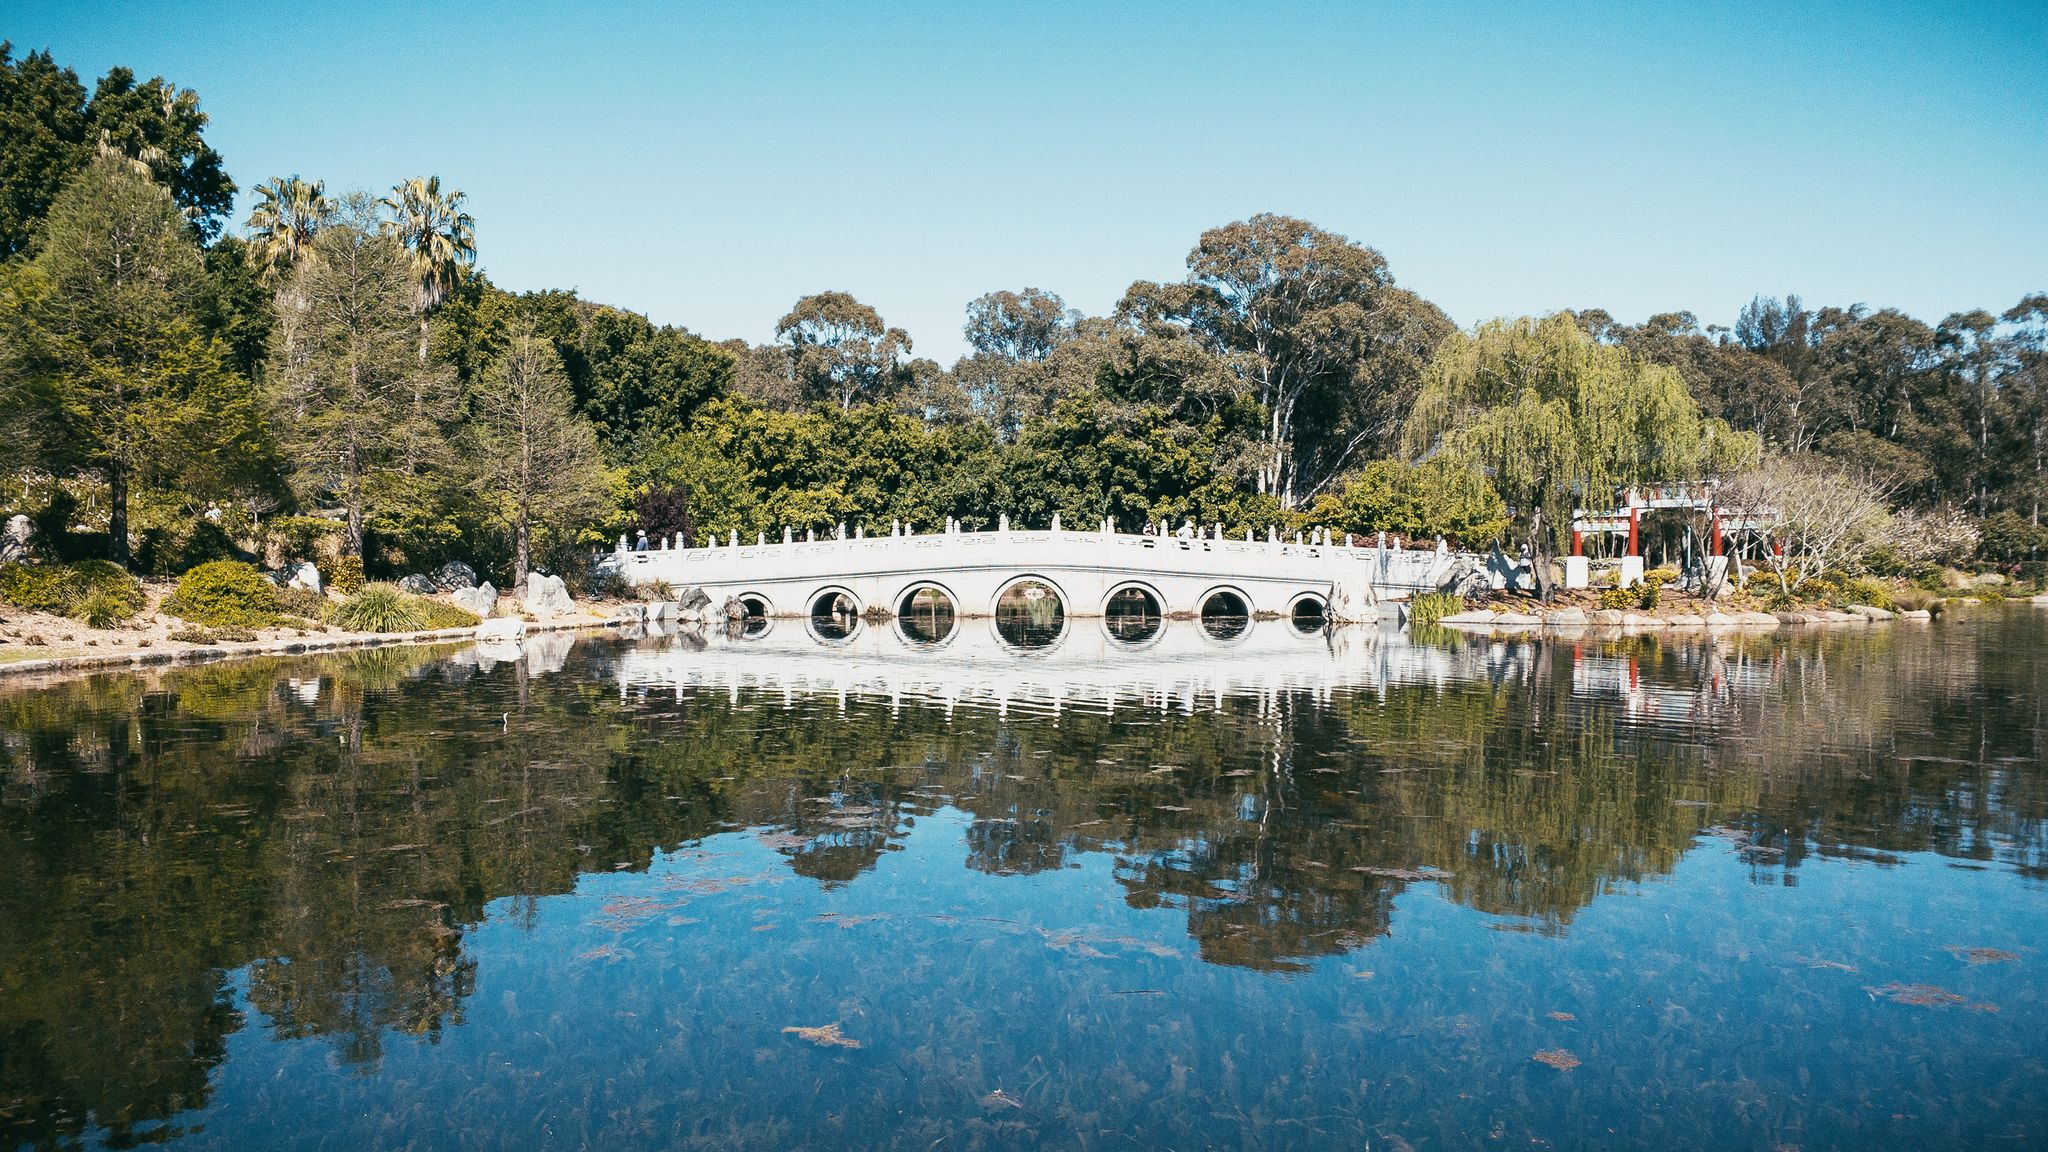 A photo of a white Chinese-style low stone bridge crossing over a lake. There's very little wind so there's a good reflection of the bridge on the surface of the water.